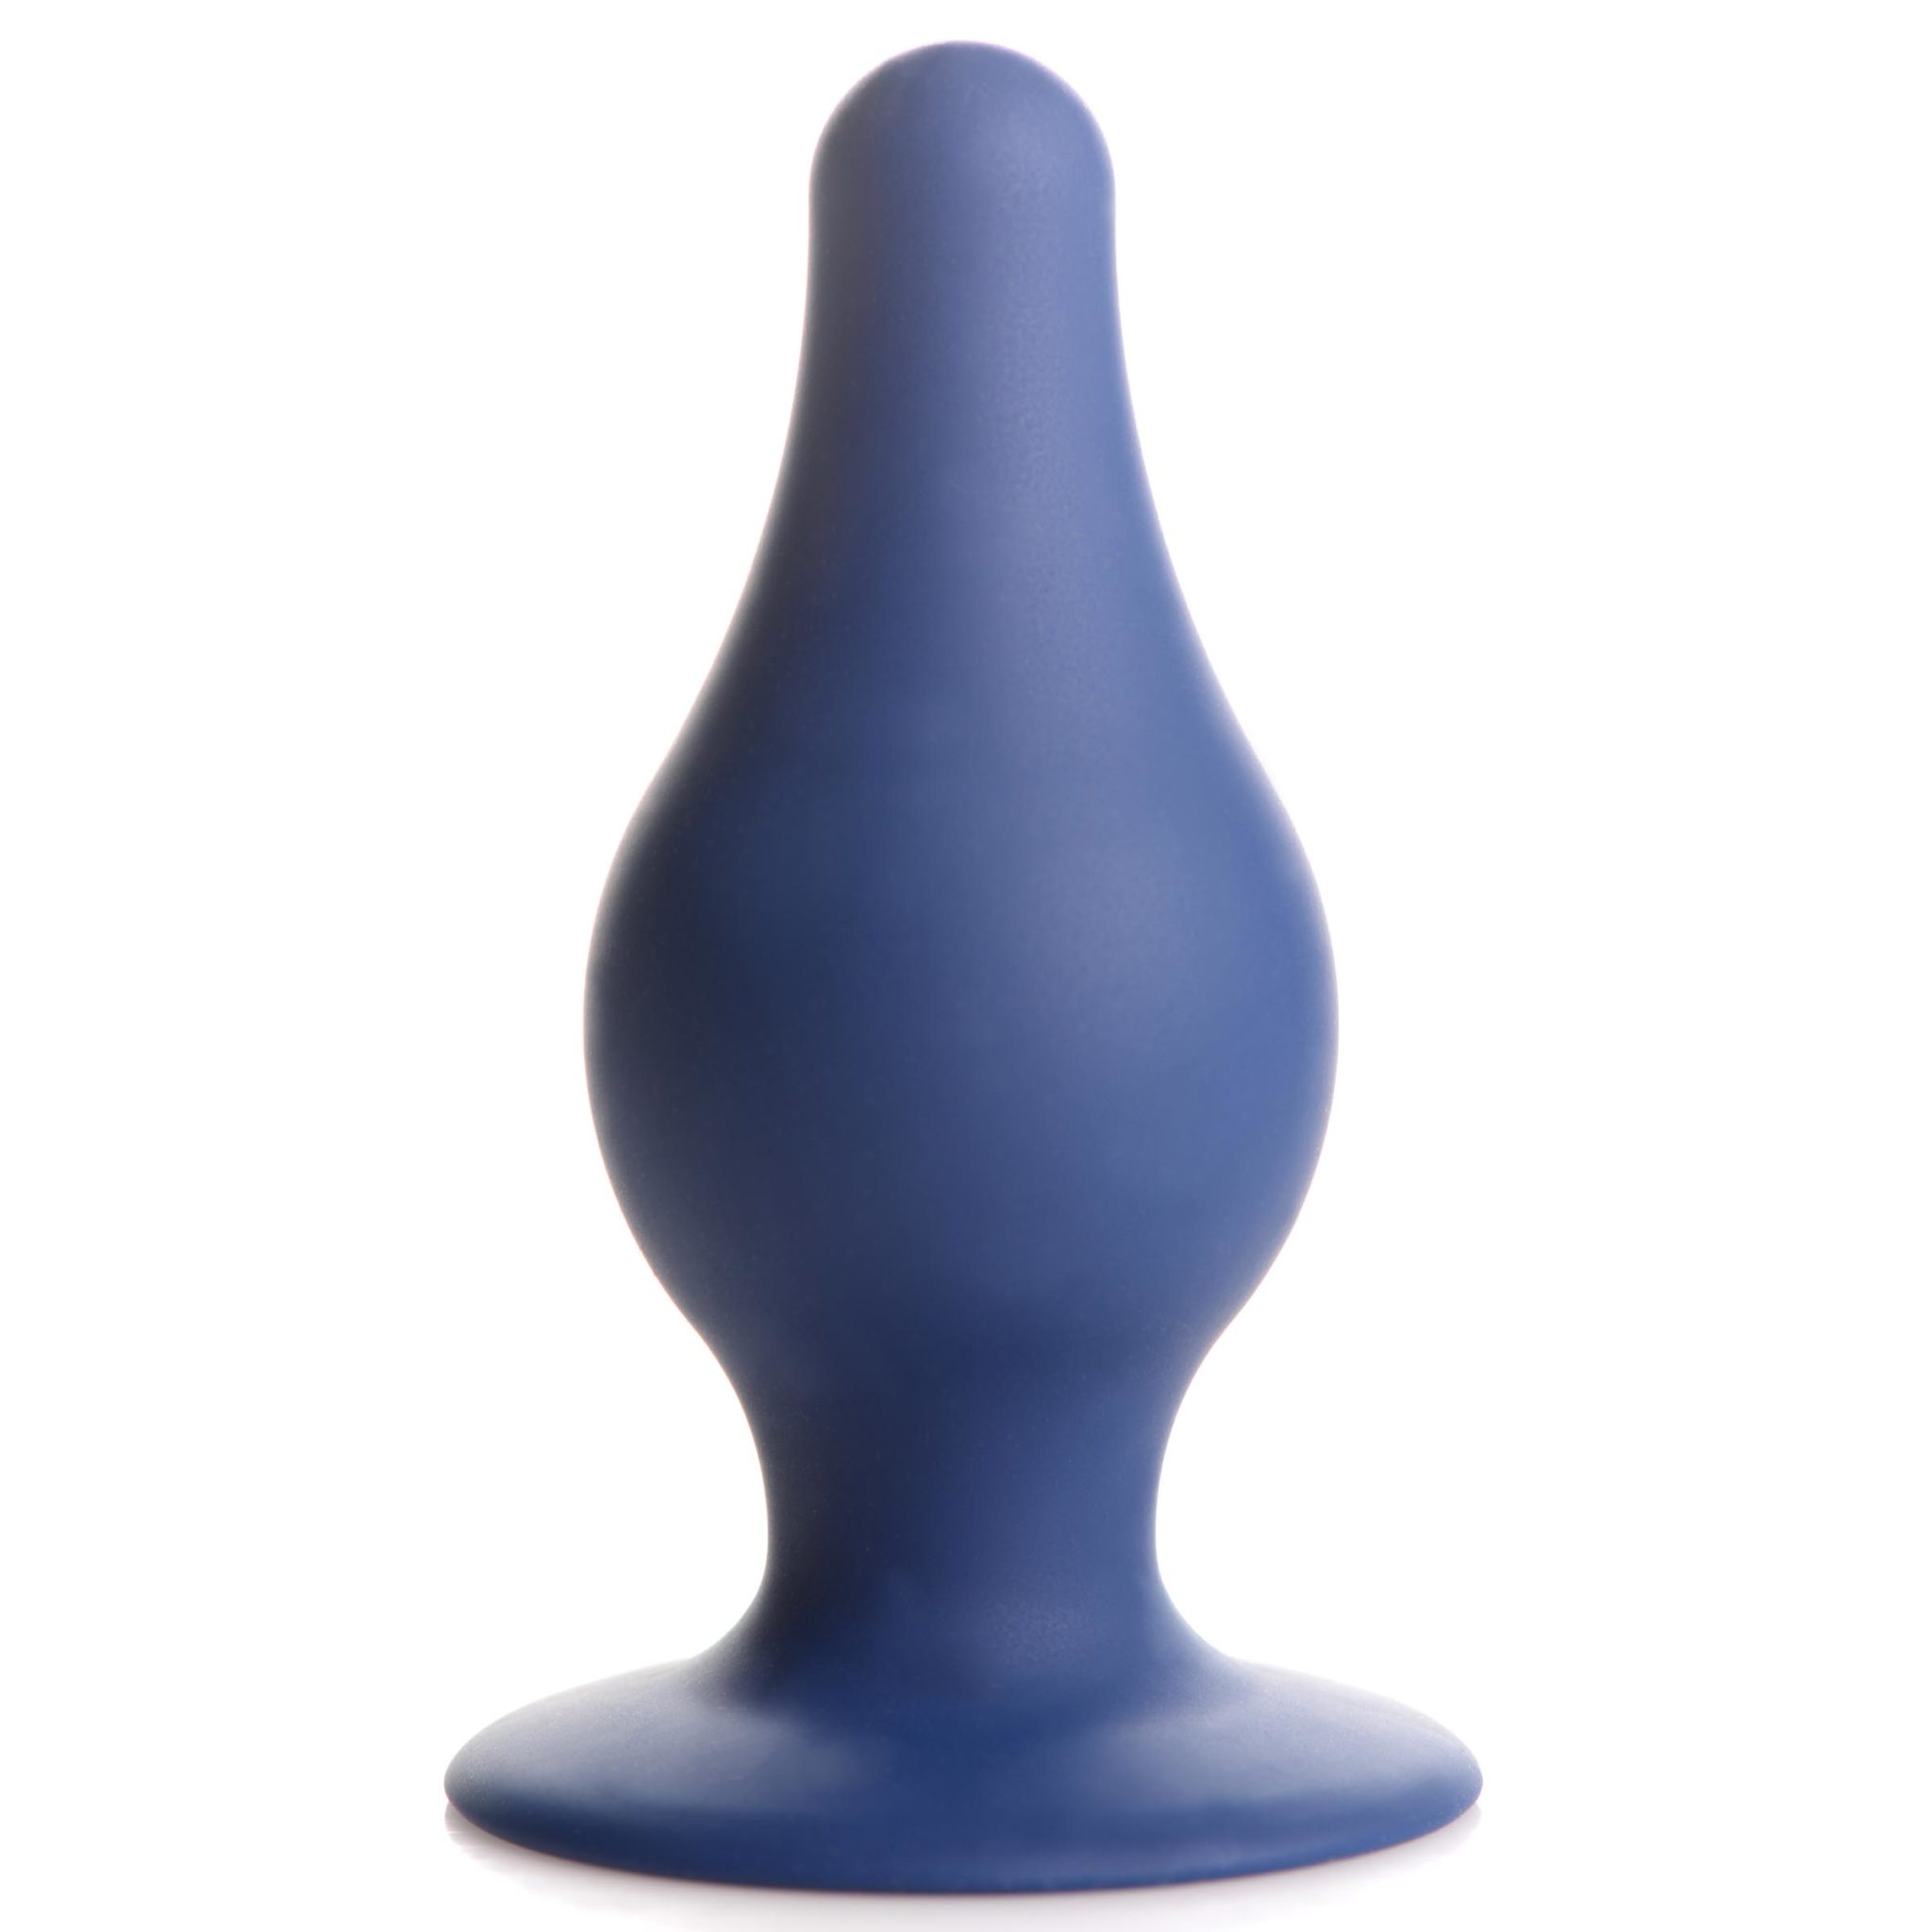 Squeezable Tapered Large Anal Plug – Blue